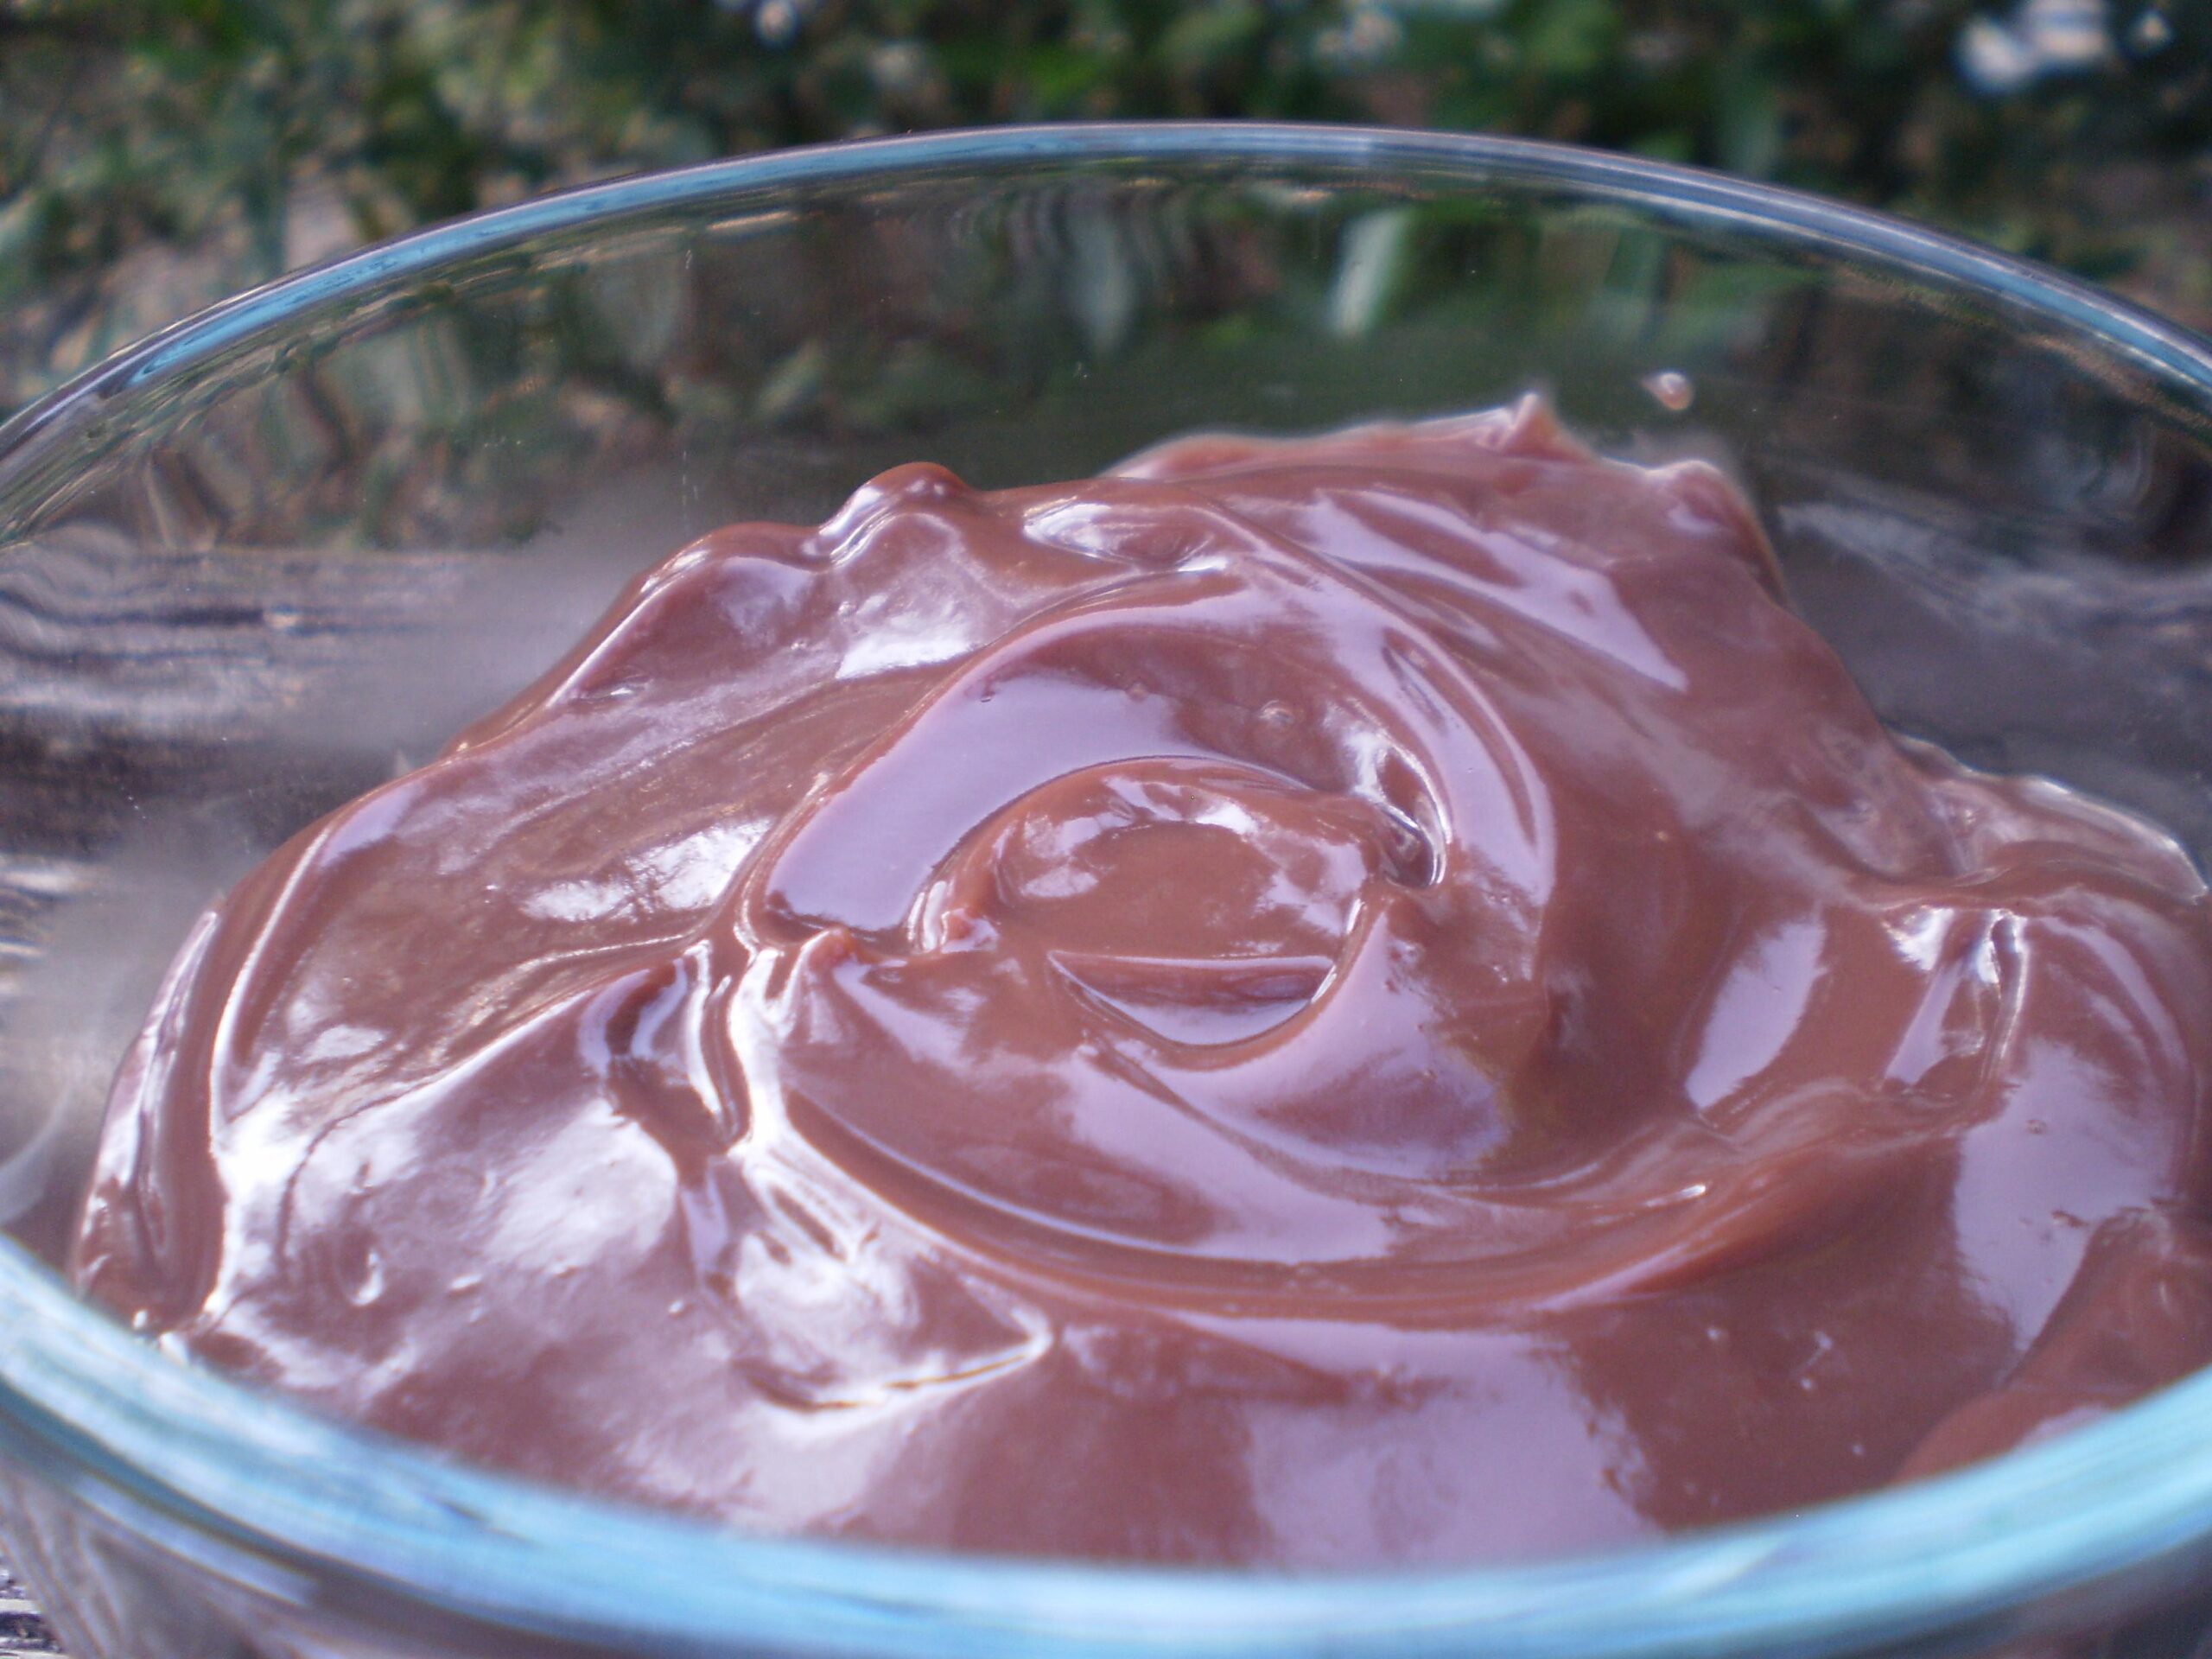  A rich, velvety chocolate pudding perfect for any occasion.